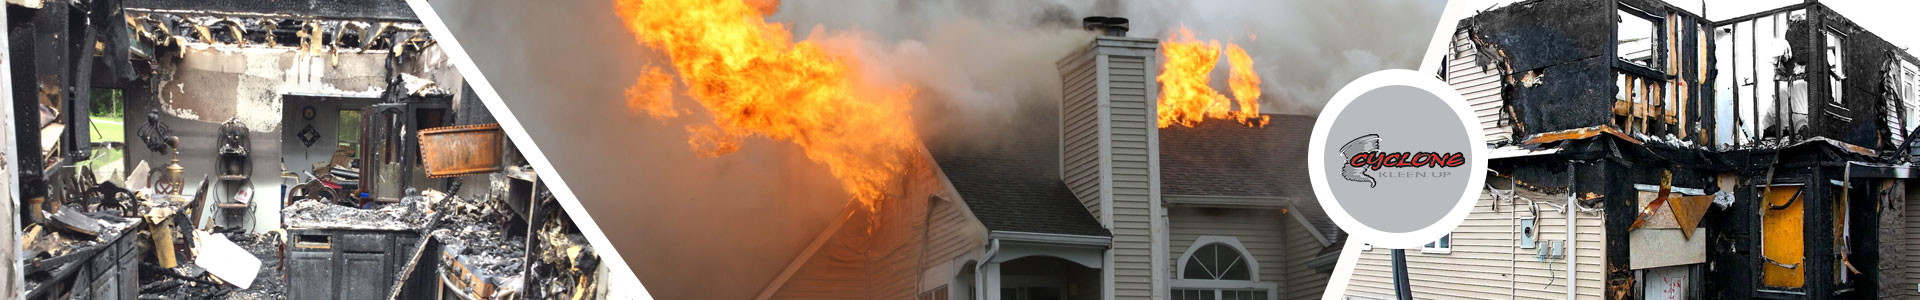 Fire Damage Restoration in Colorado Springs, CO | Cyclone Kleen Up